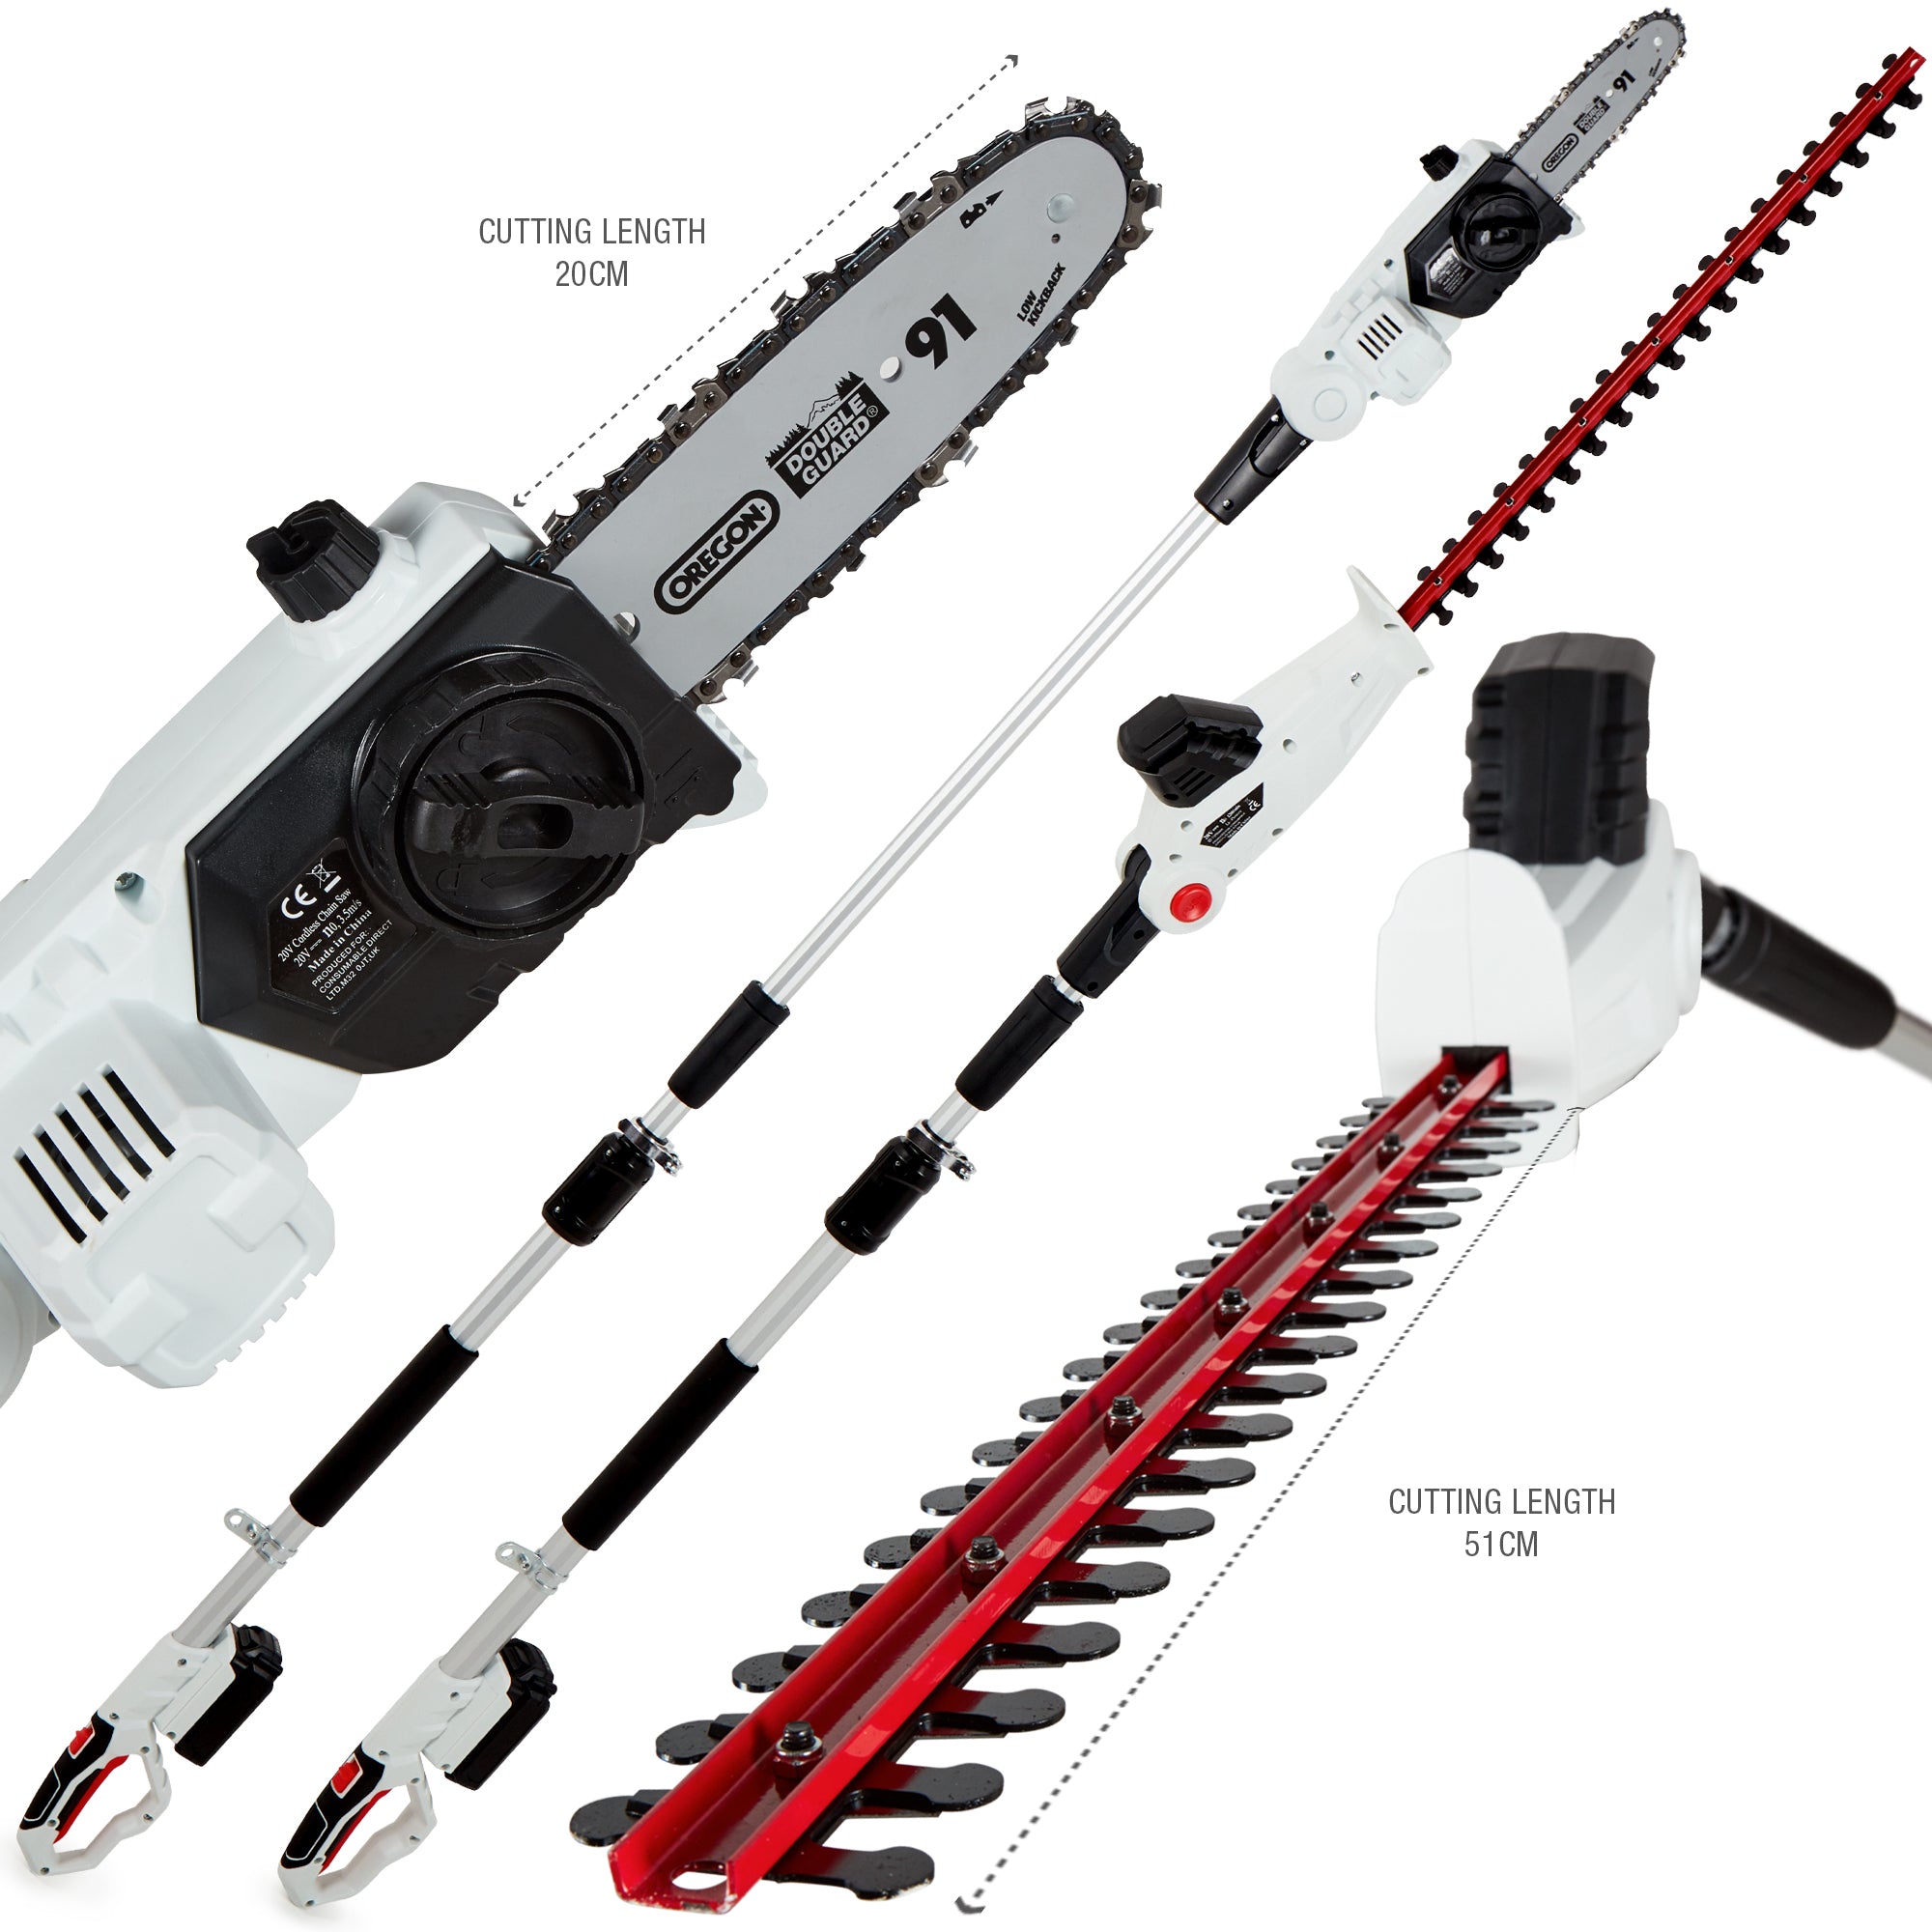 NETTA 2-in-1 20V Cordless Pole Telescopic Chainsaw and Hedge Trimmer